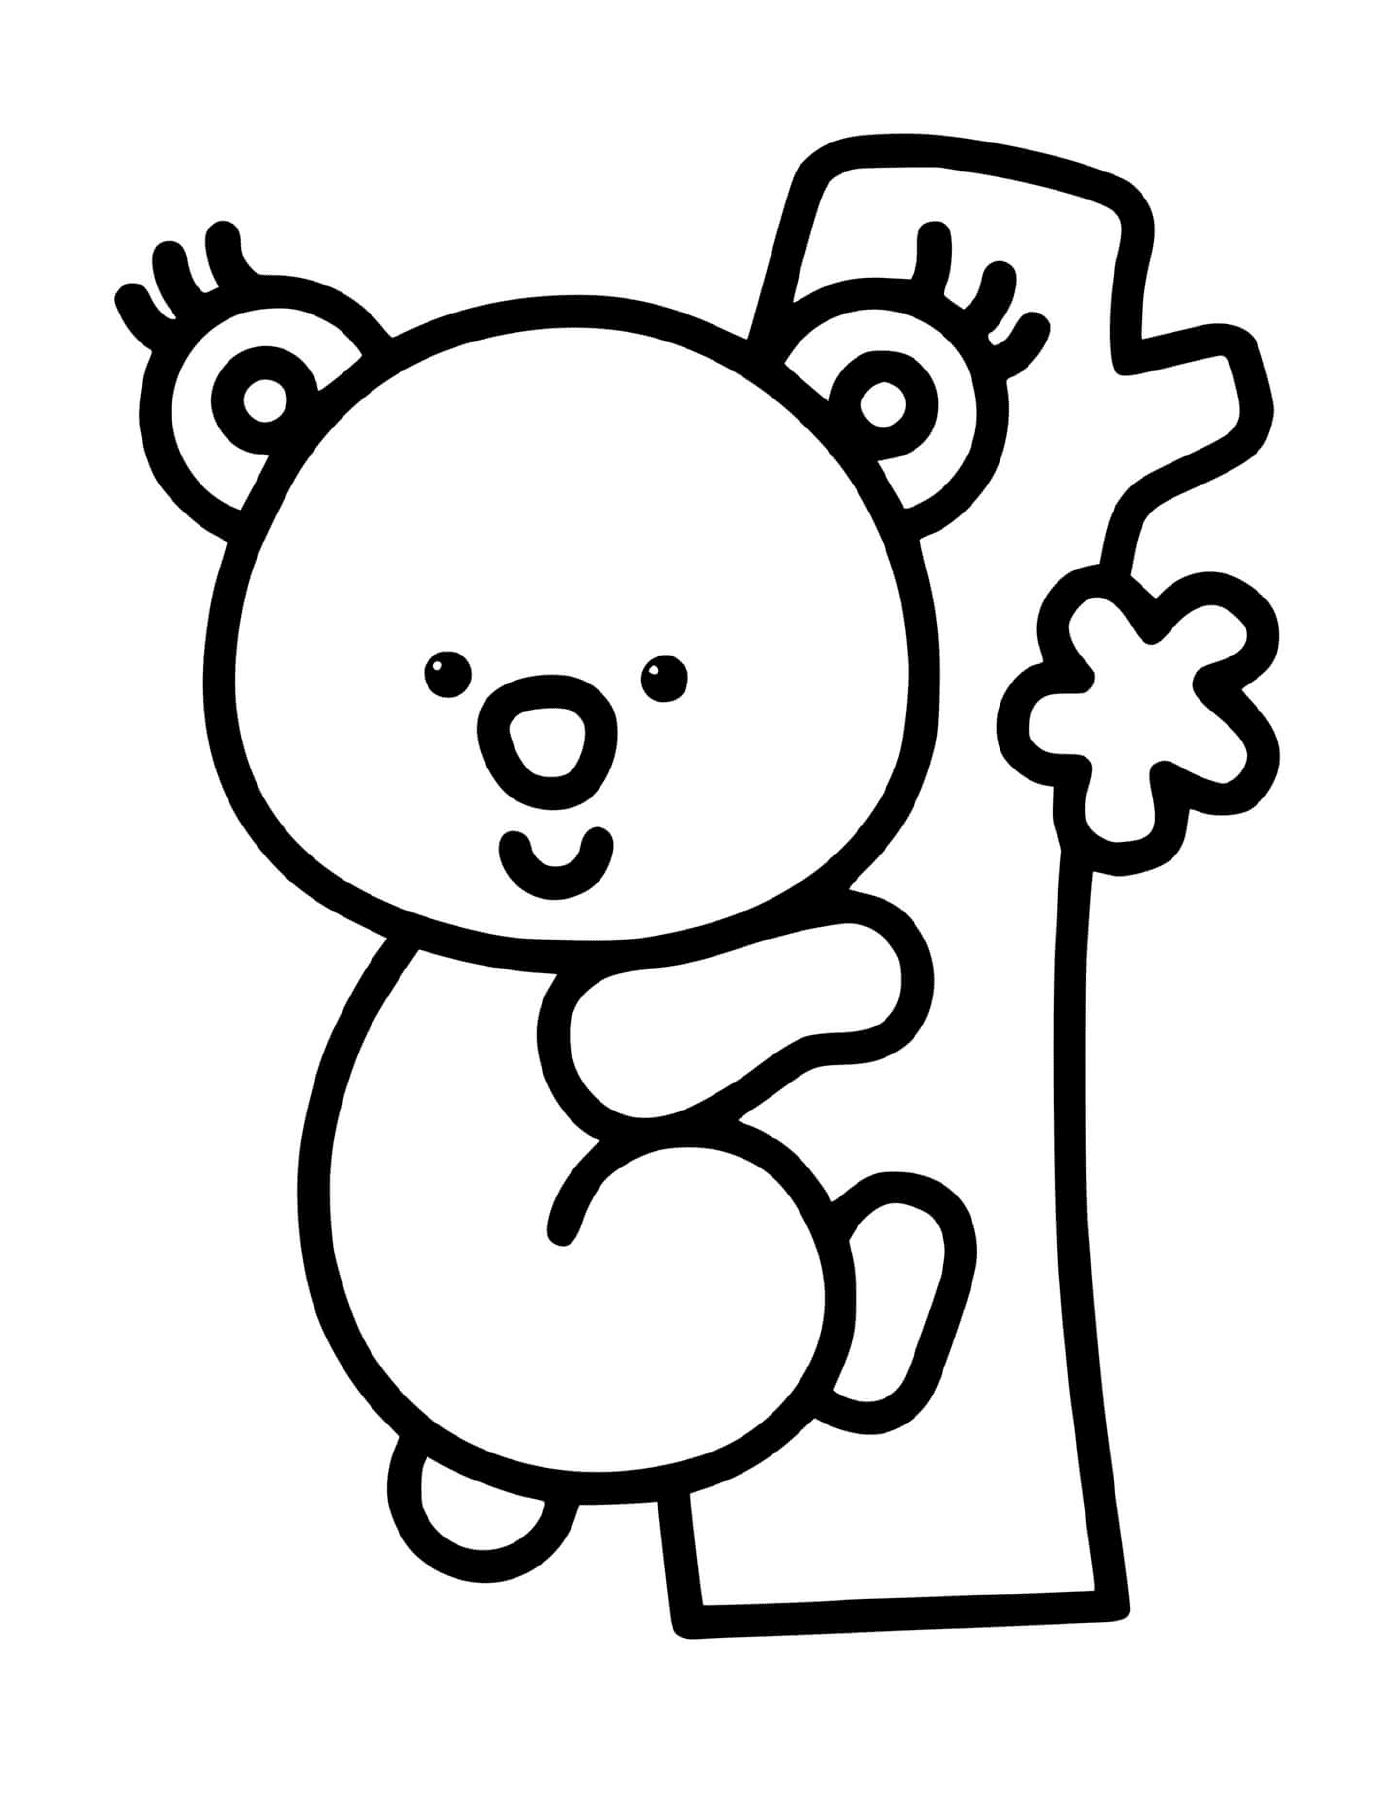  An easy to draw panda for 2-year-olds 